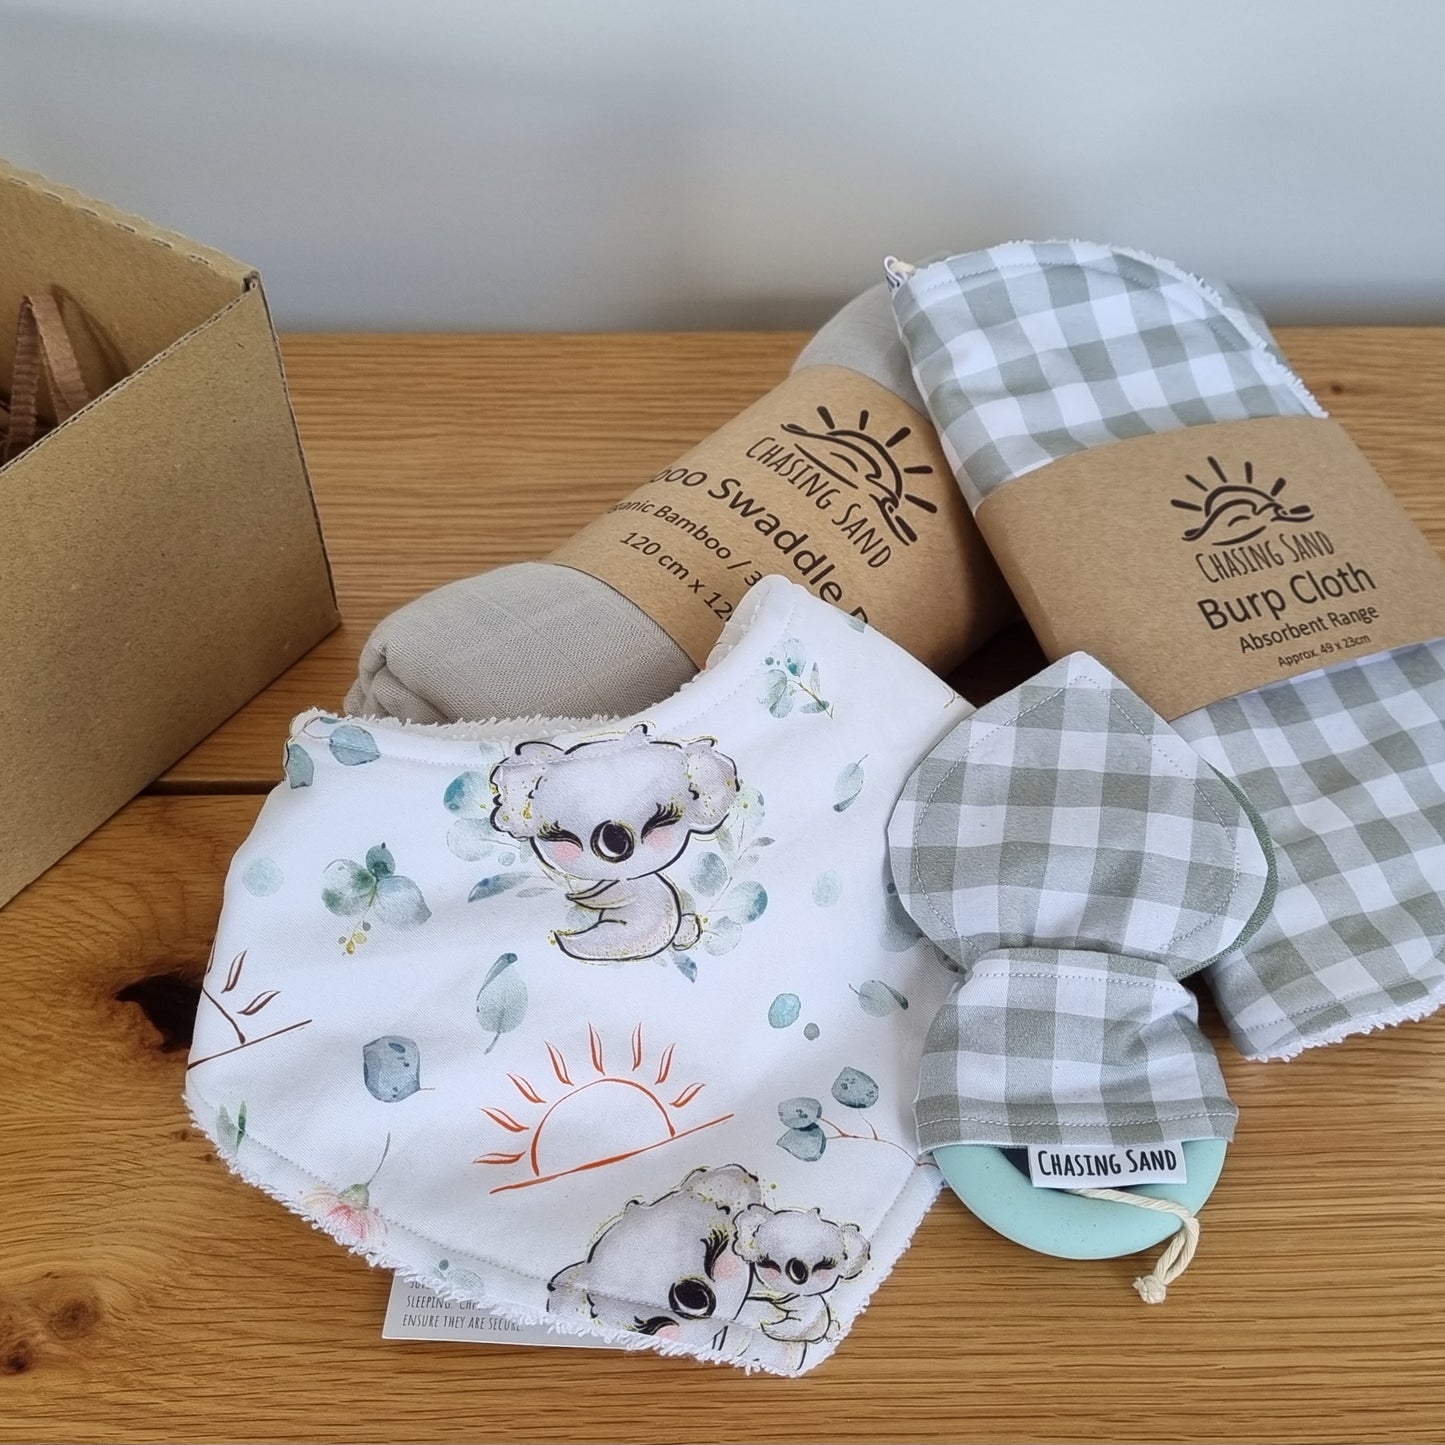 For Baby Gift Box - Neutral against wooden/white backdrop. Each Gift Box contains 1x Swaddle Blanket, 1x Burp Cloth, 1x Dribble Bib and 1x Teether.